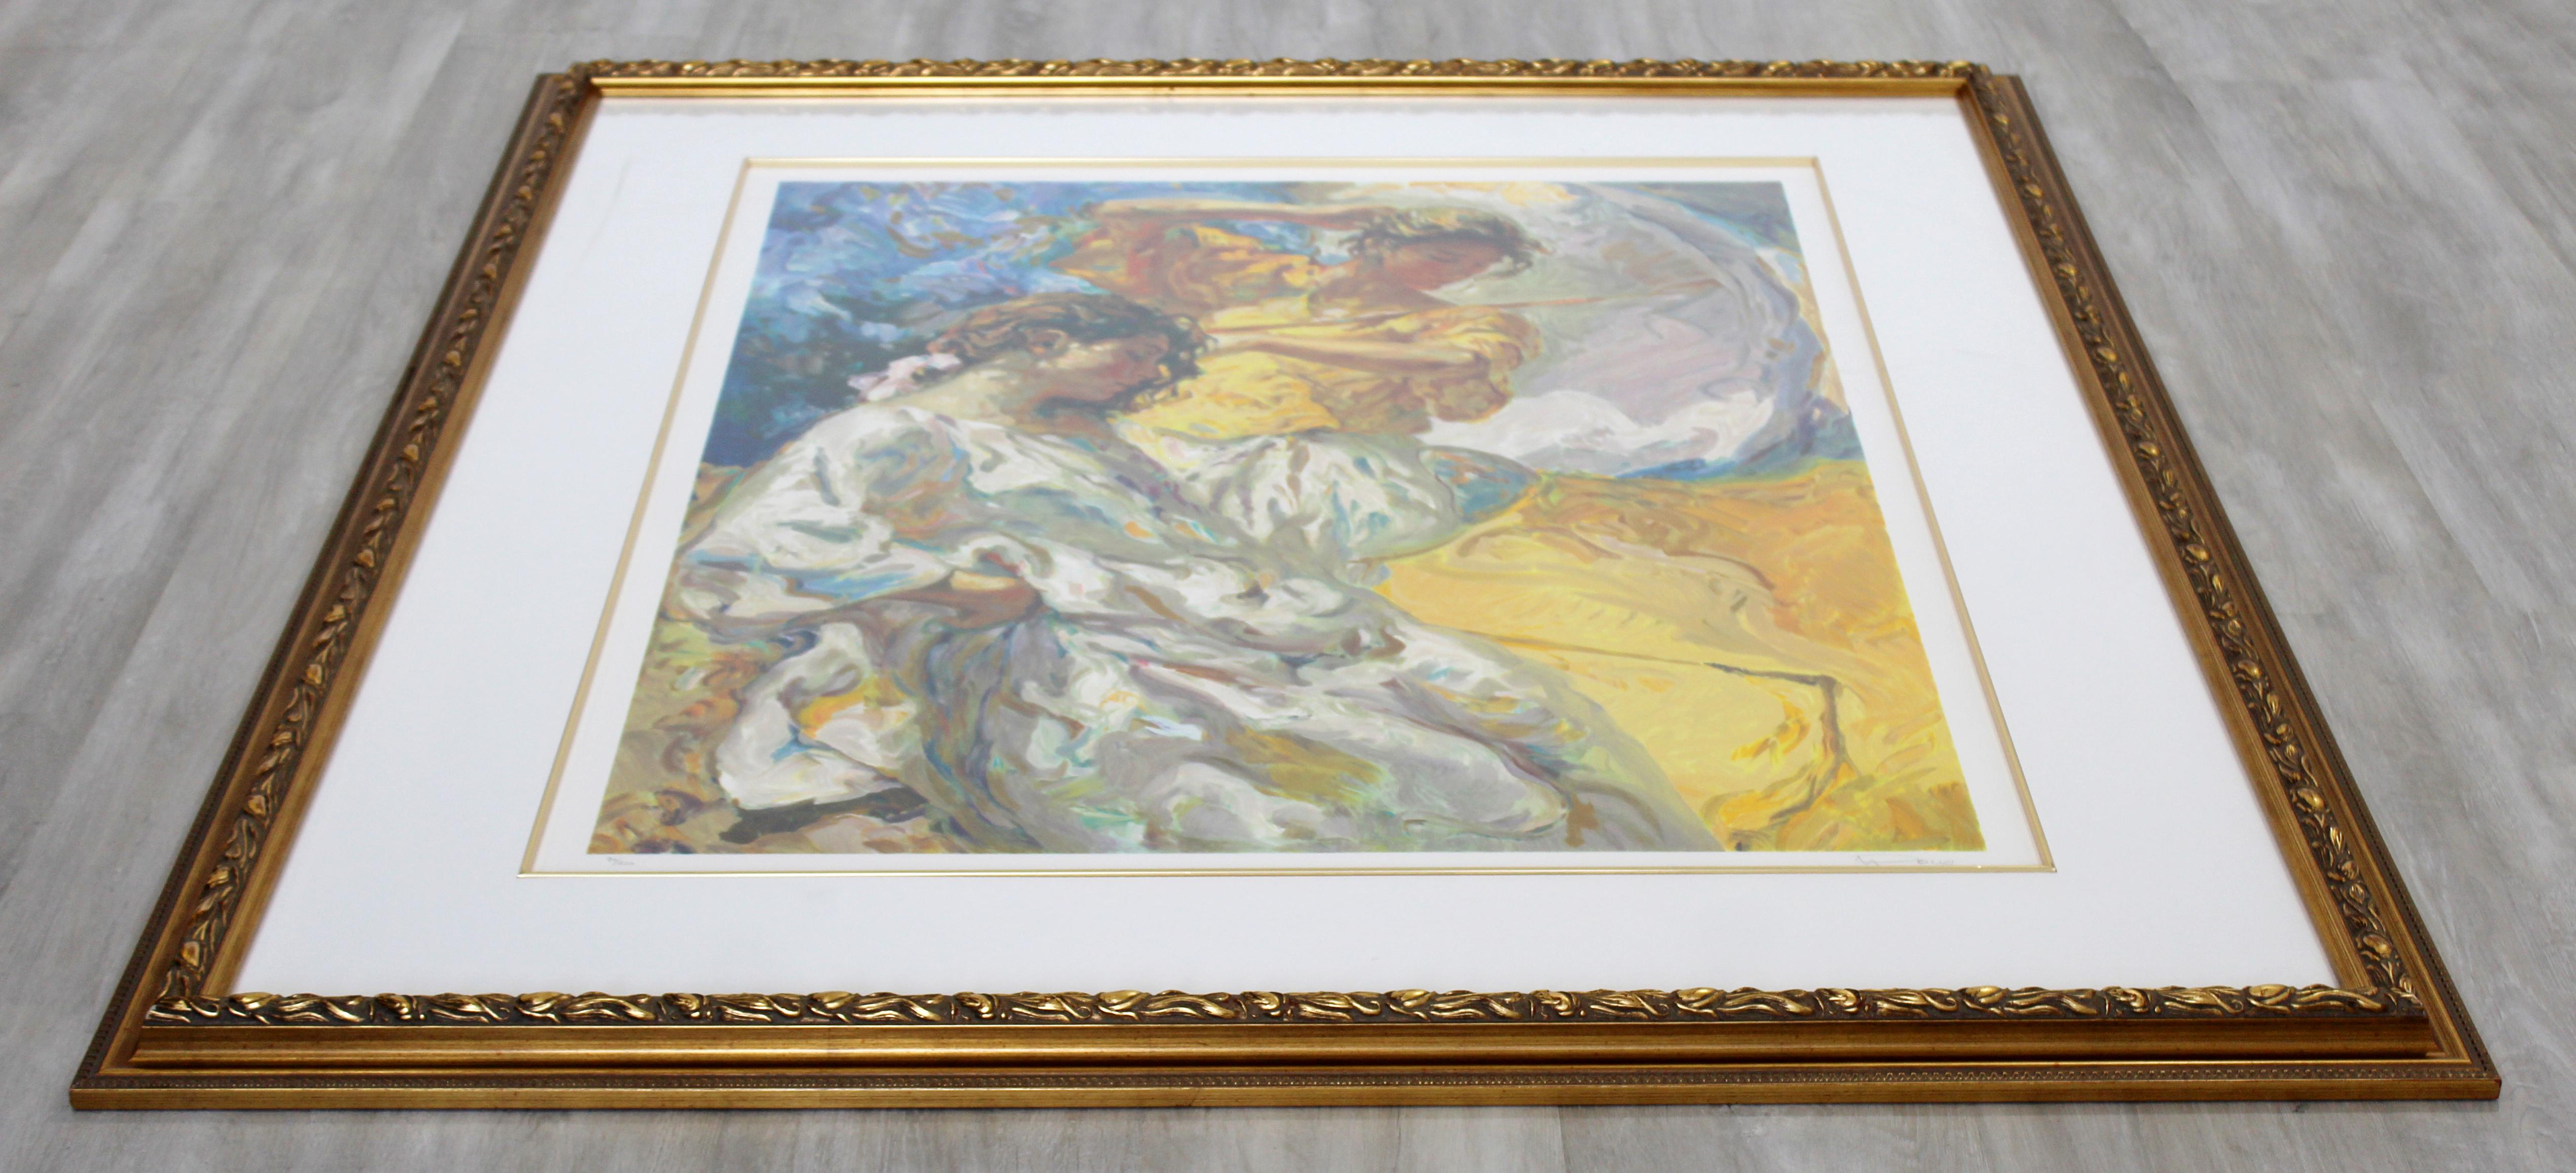 Traditional Framed Jose Royo Signed Serigraph 2 Women Yellow Dress 90/250 In Good Condition For Sale In Keego Harbor, MI